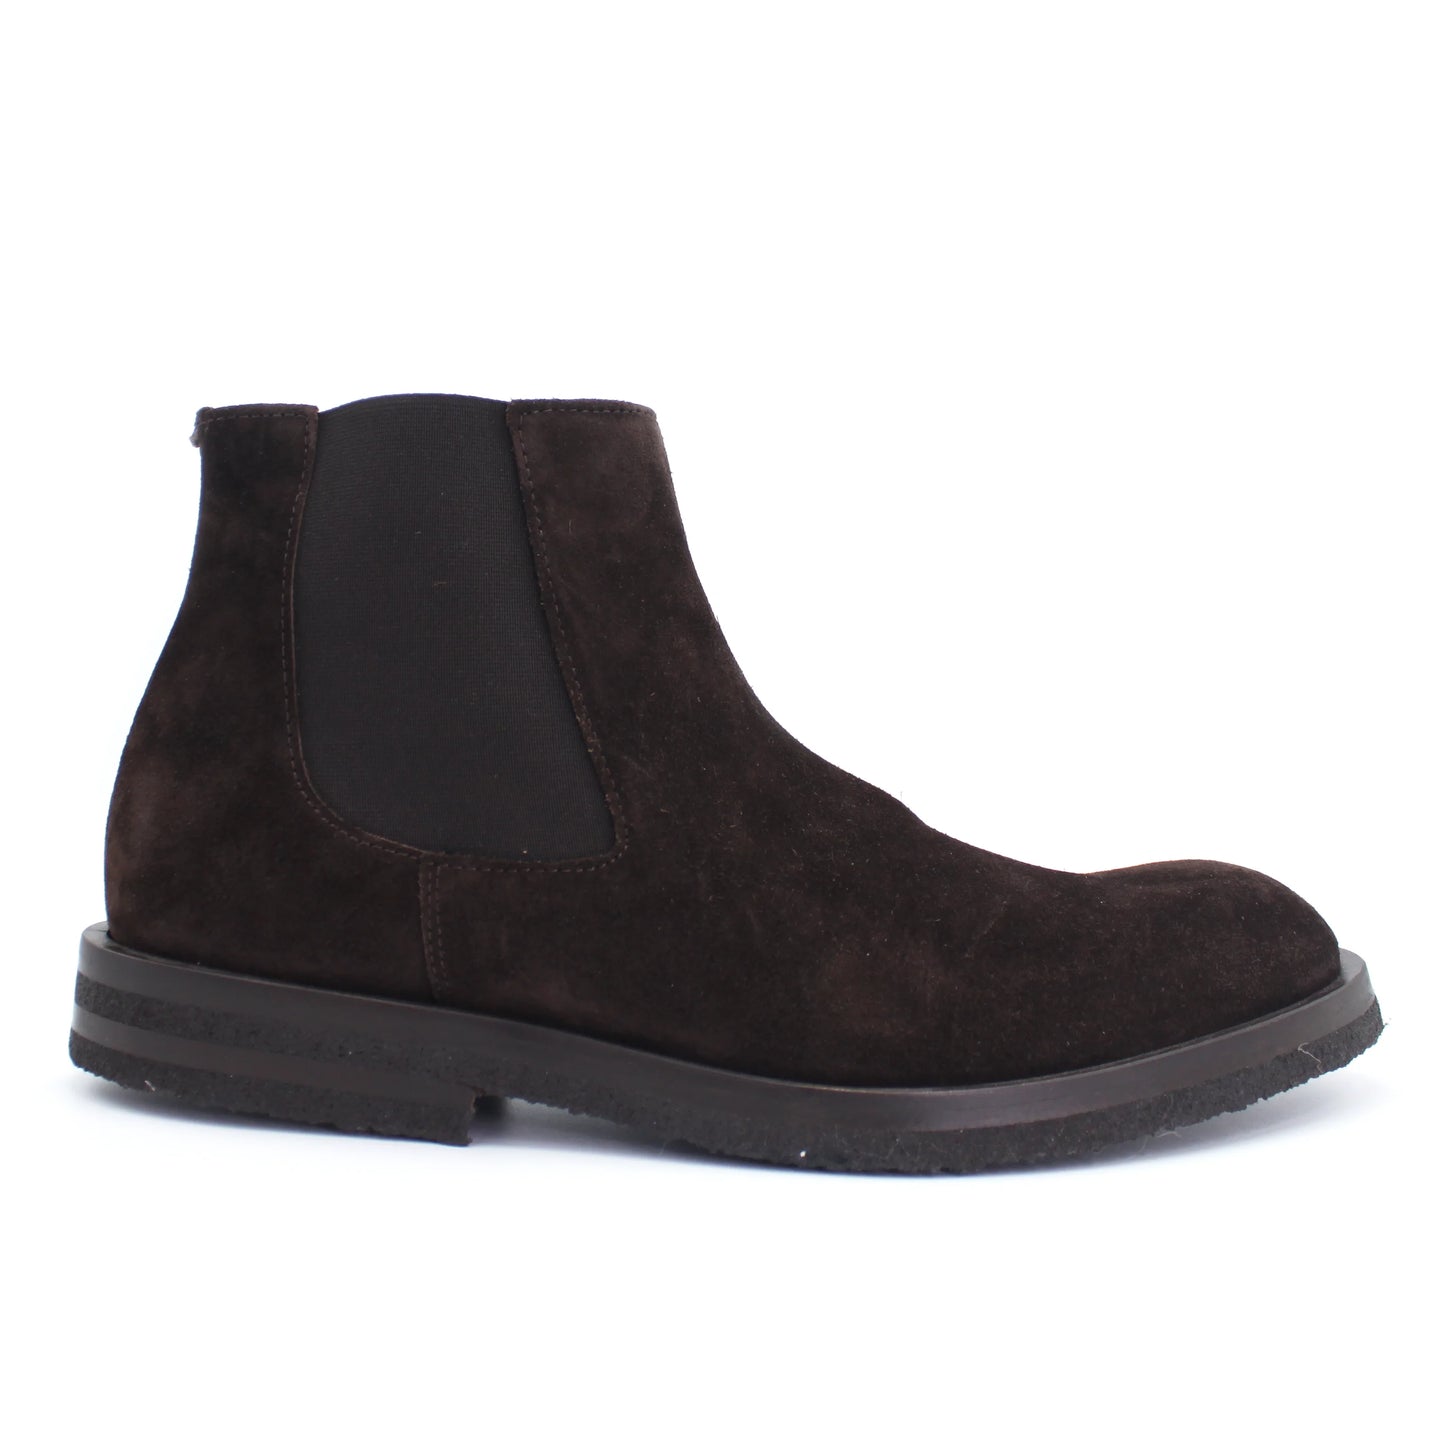 Men's Ankle Boot - Leather Suede Caffe - AC158